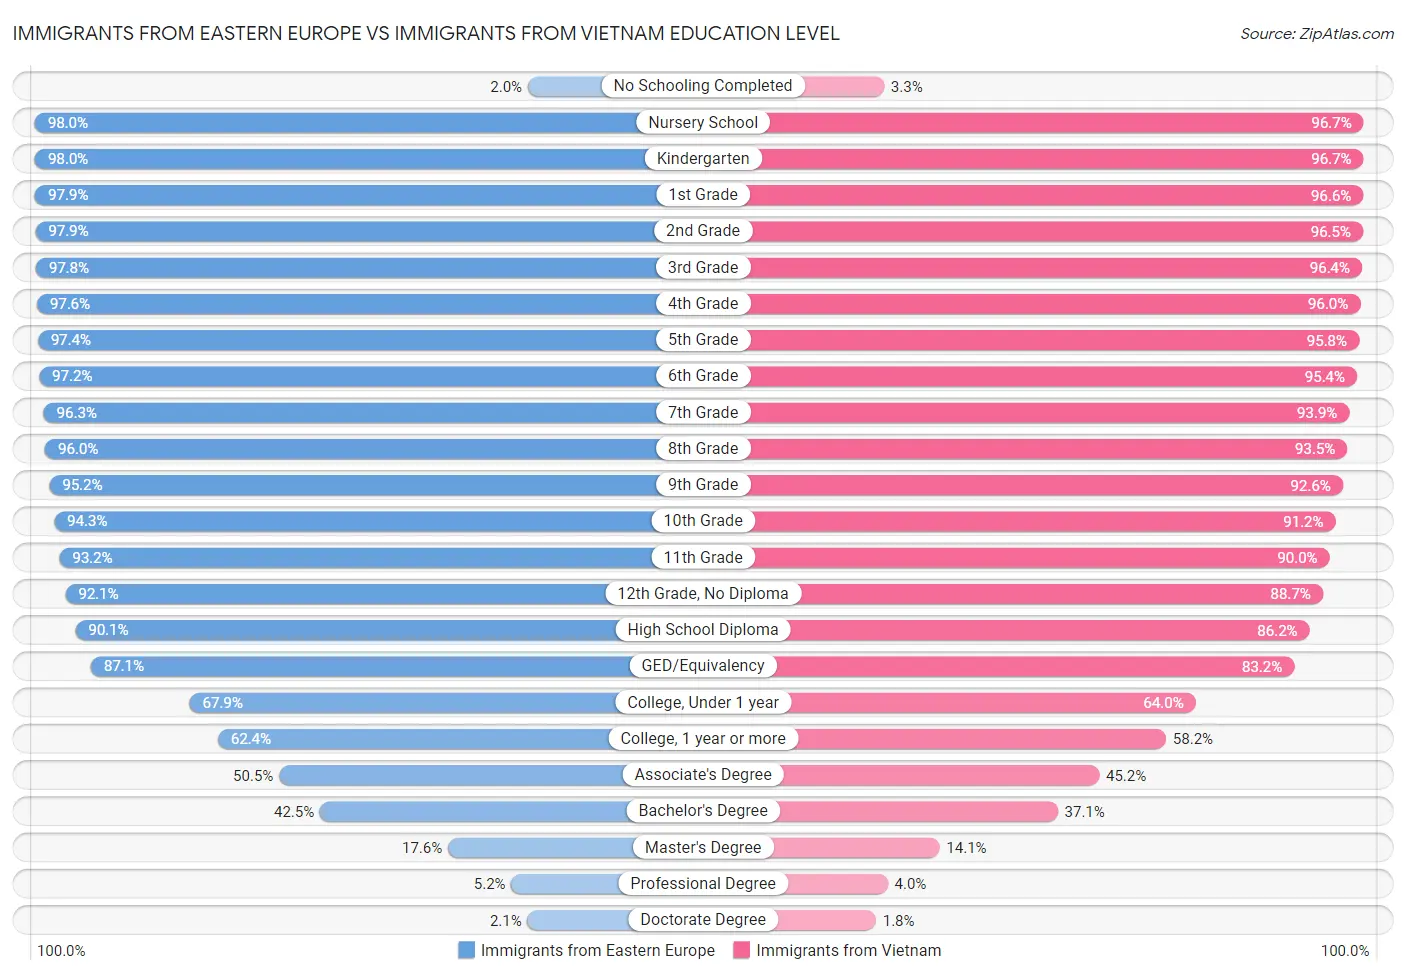 Immigrants from Eastern Europe vs Immigrants from Vietnam Education Level